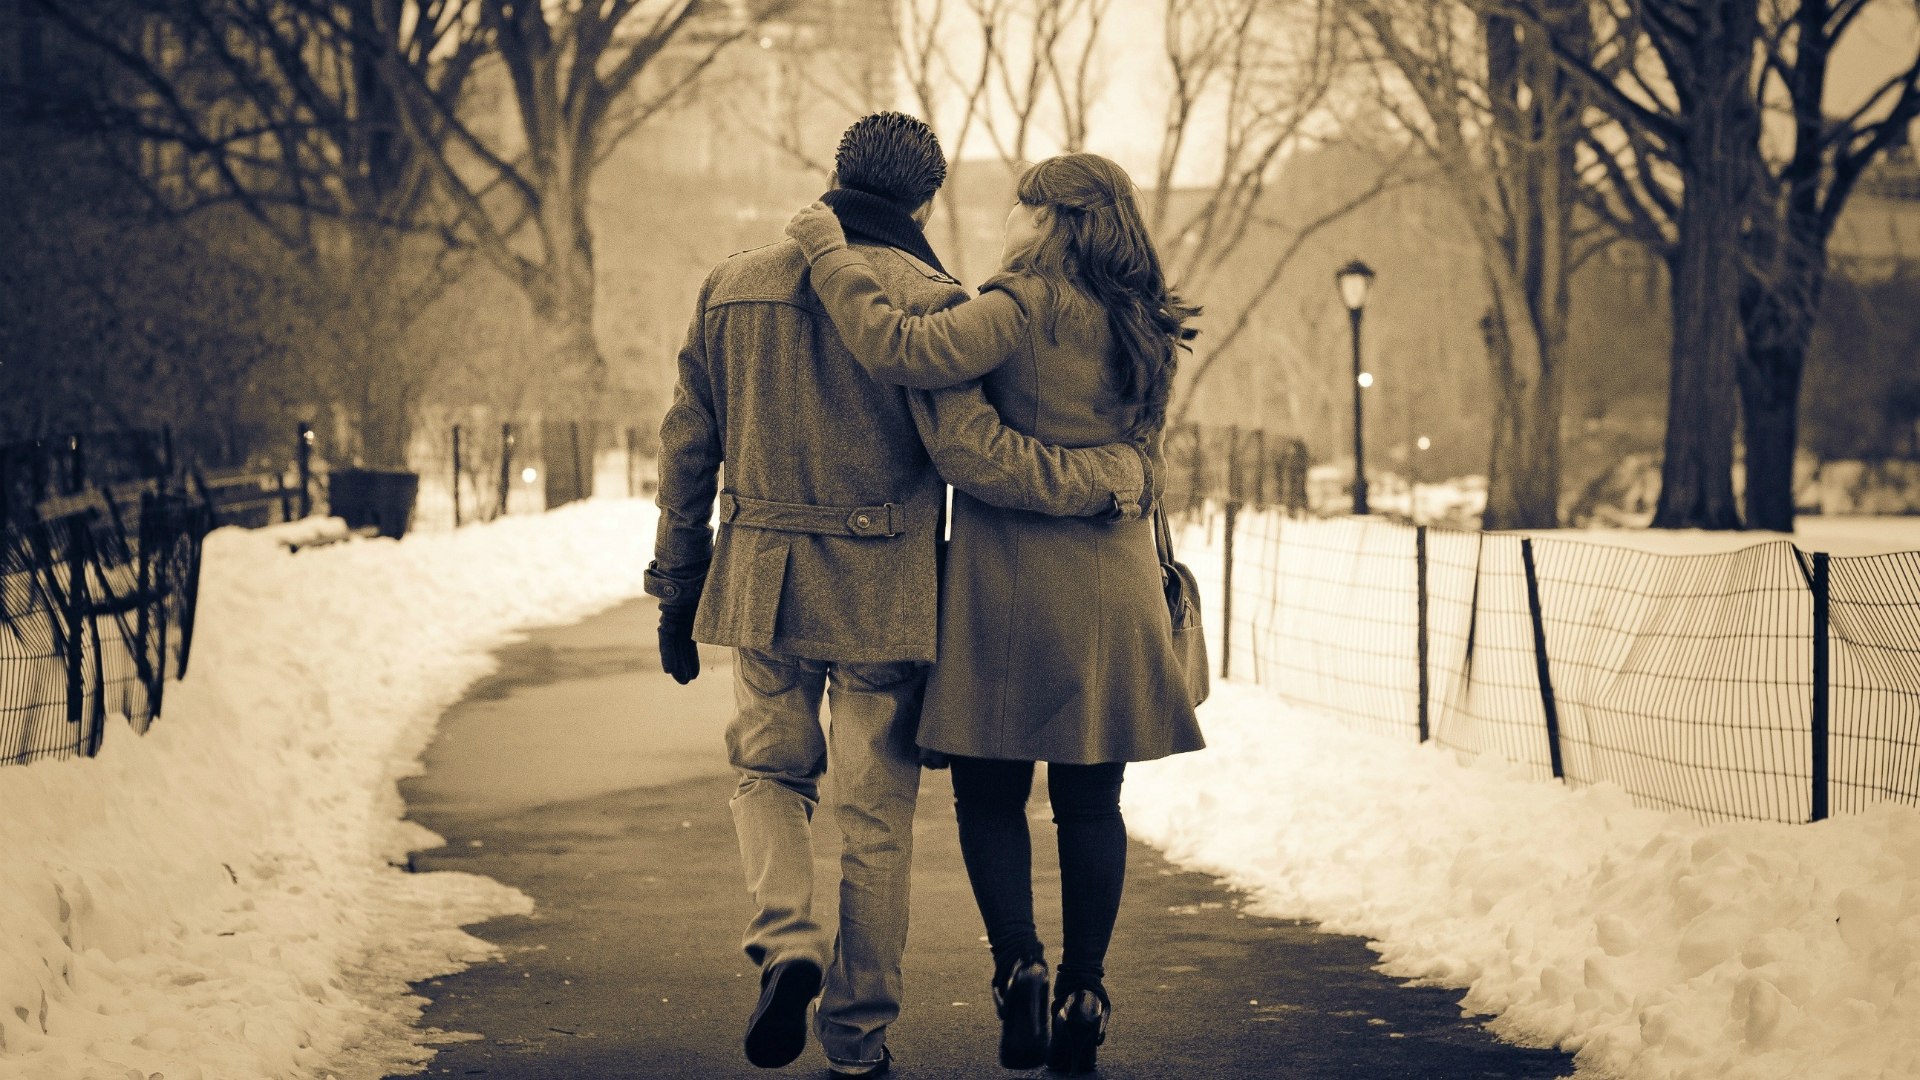 Lovers walk in winter park wallpapers and images - wallpapers ...